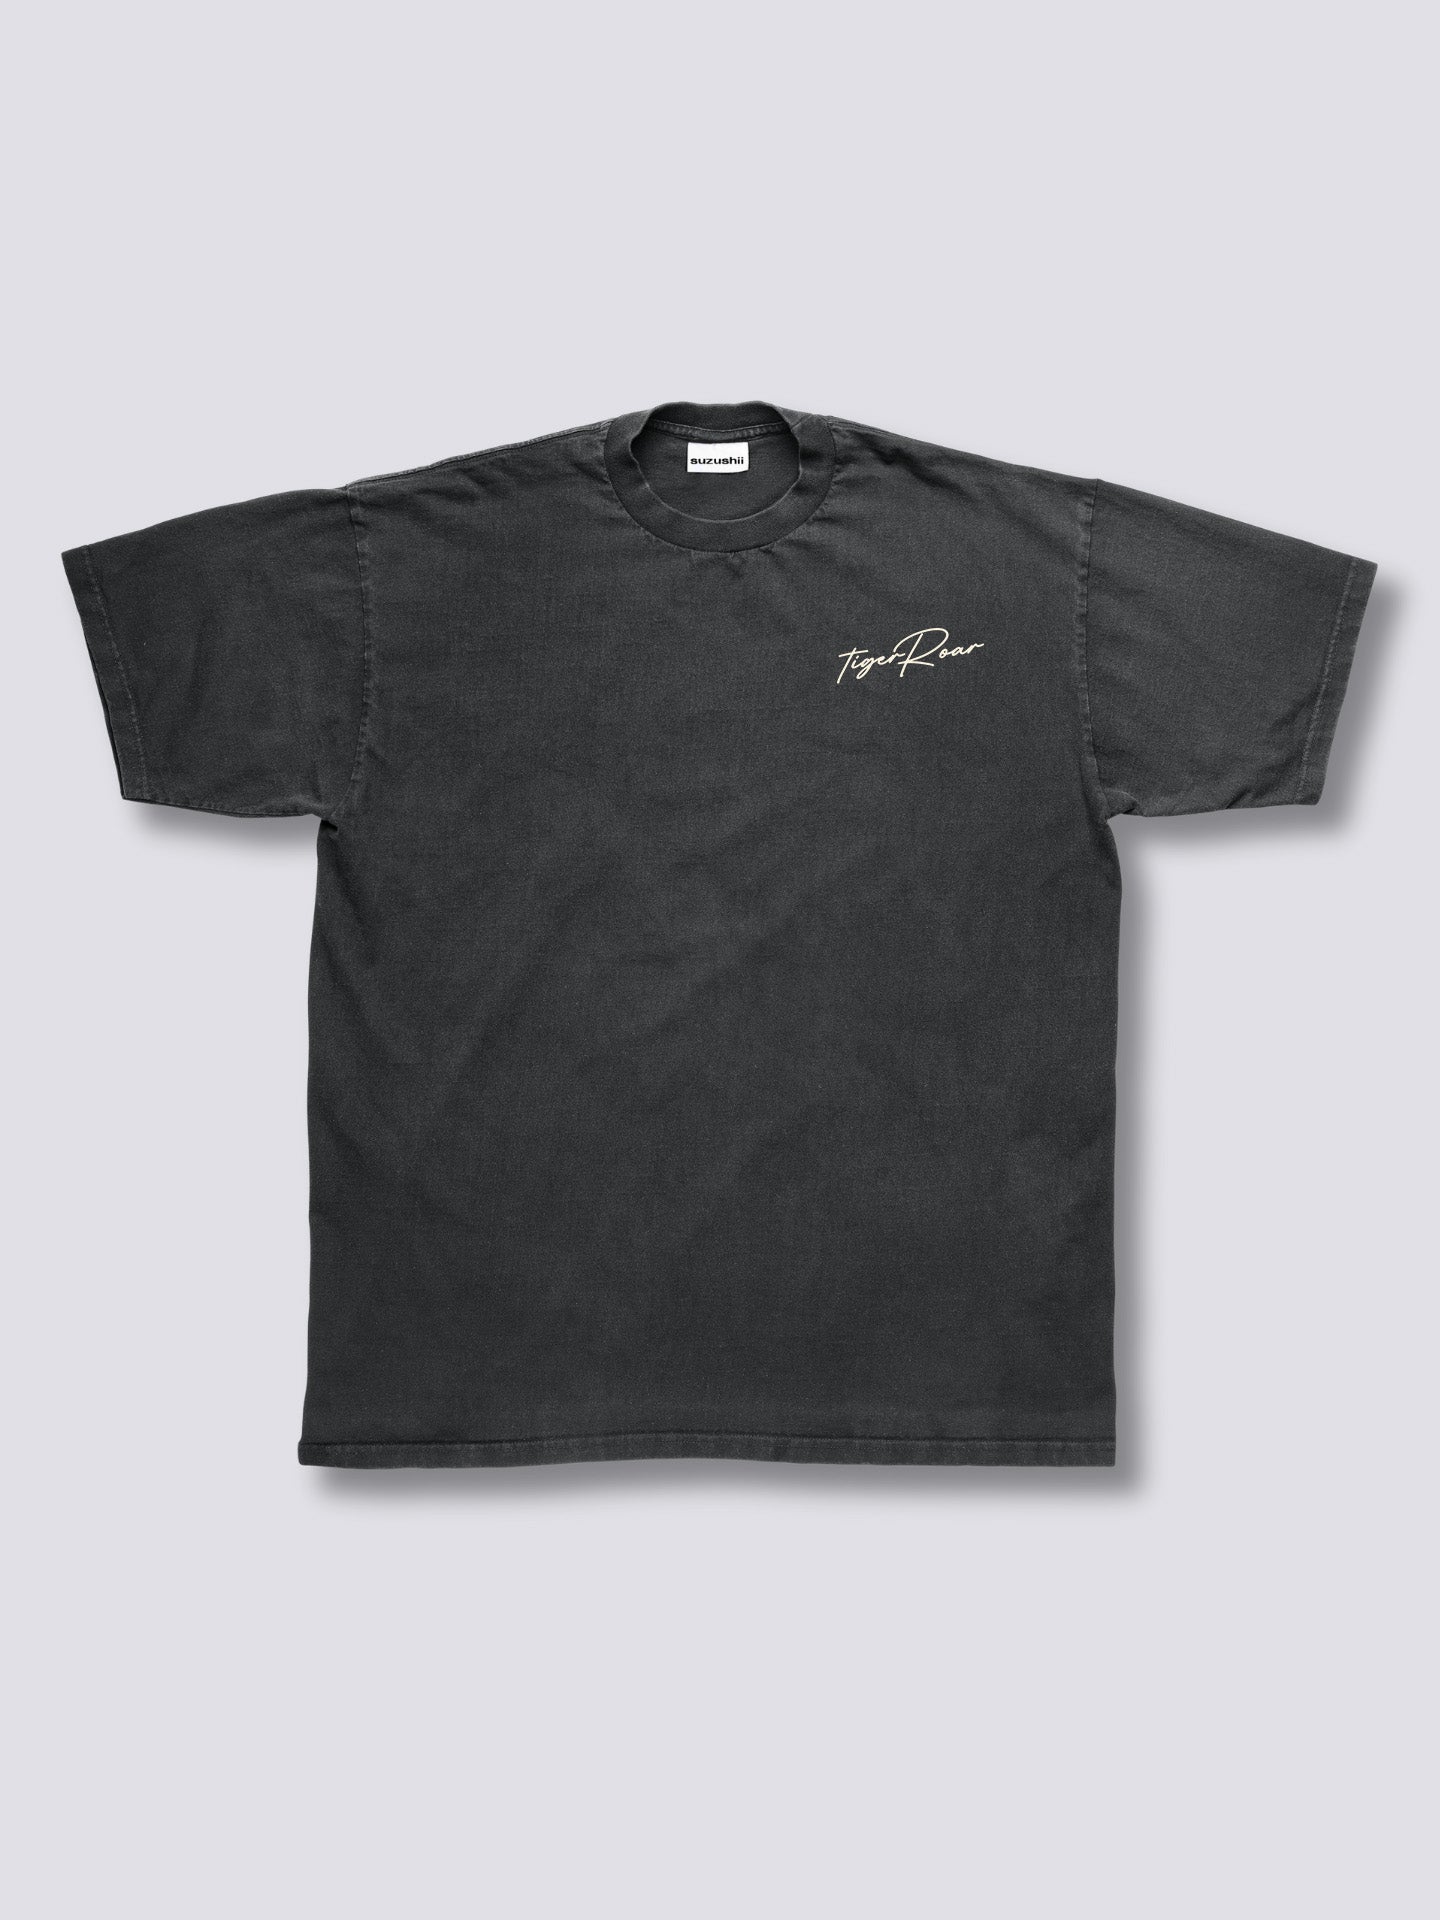 Undefeated Vintage T-Shirt